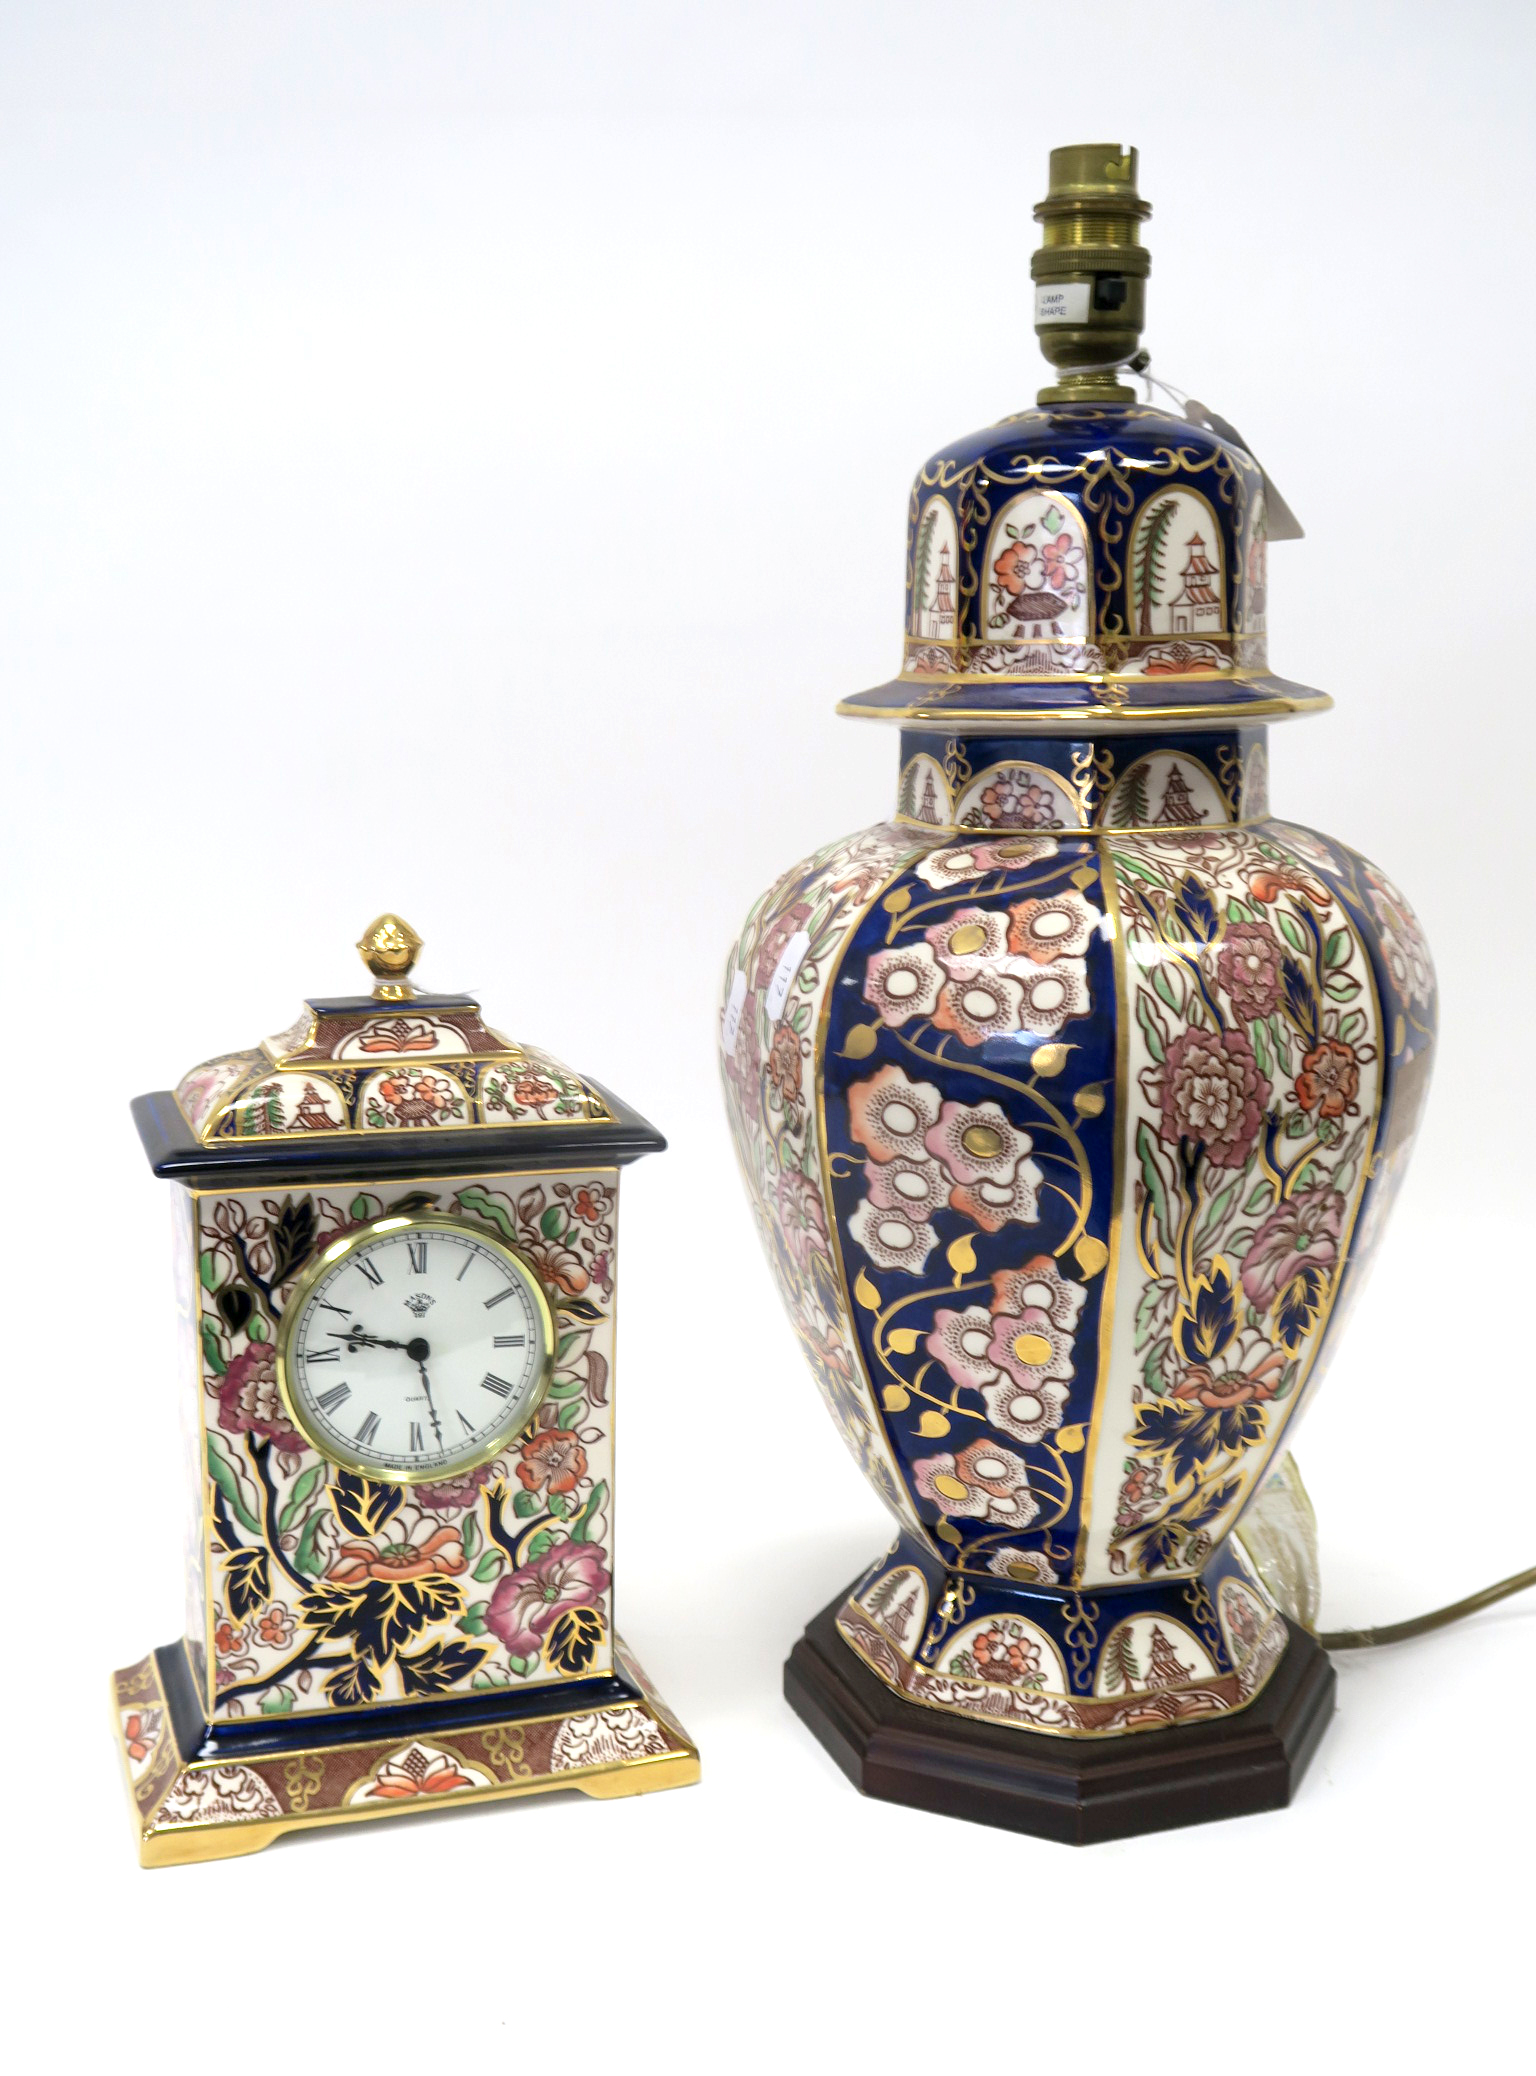 A Mason's Ironstone Pottery Table Lamp, decorated in the 'Penang' pattern with panels of flowers,